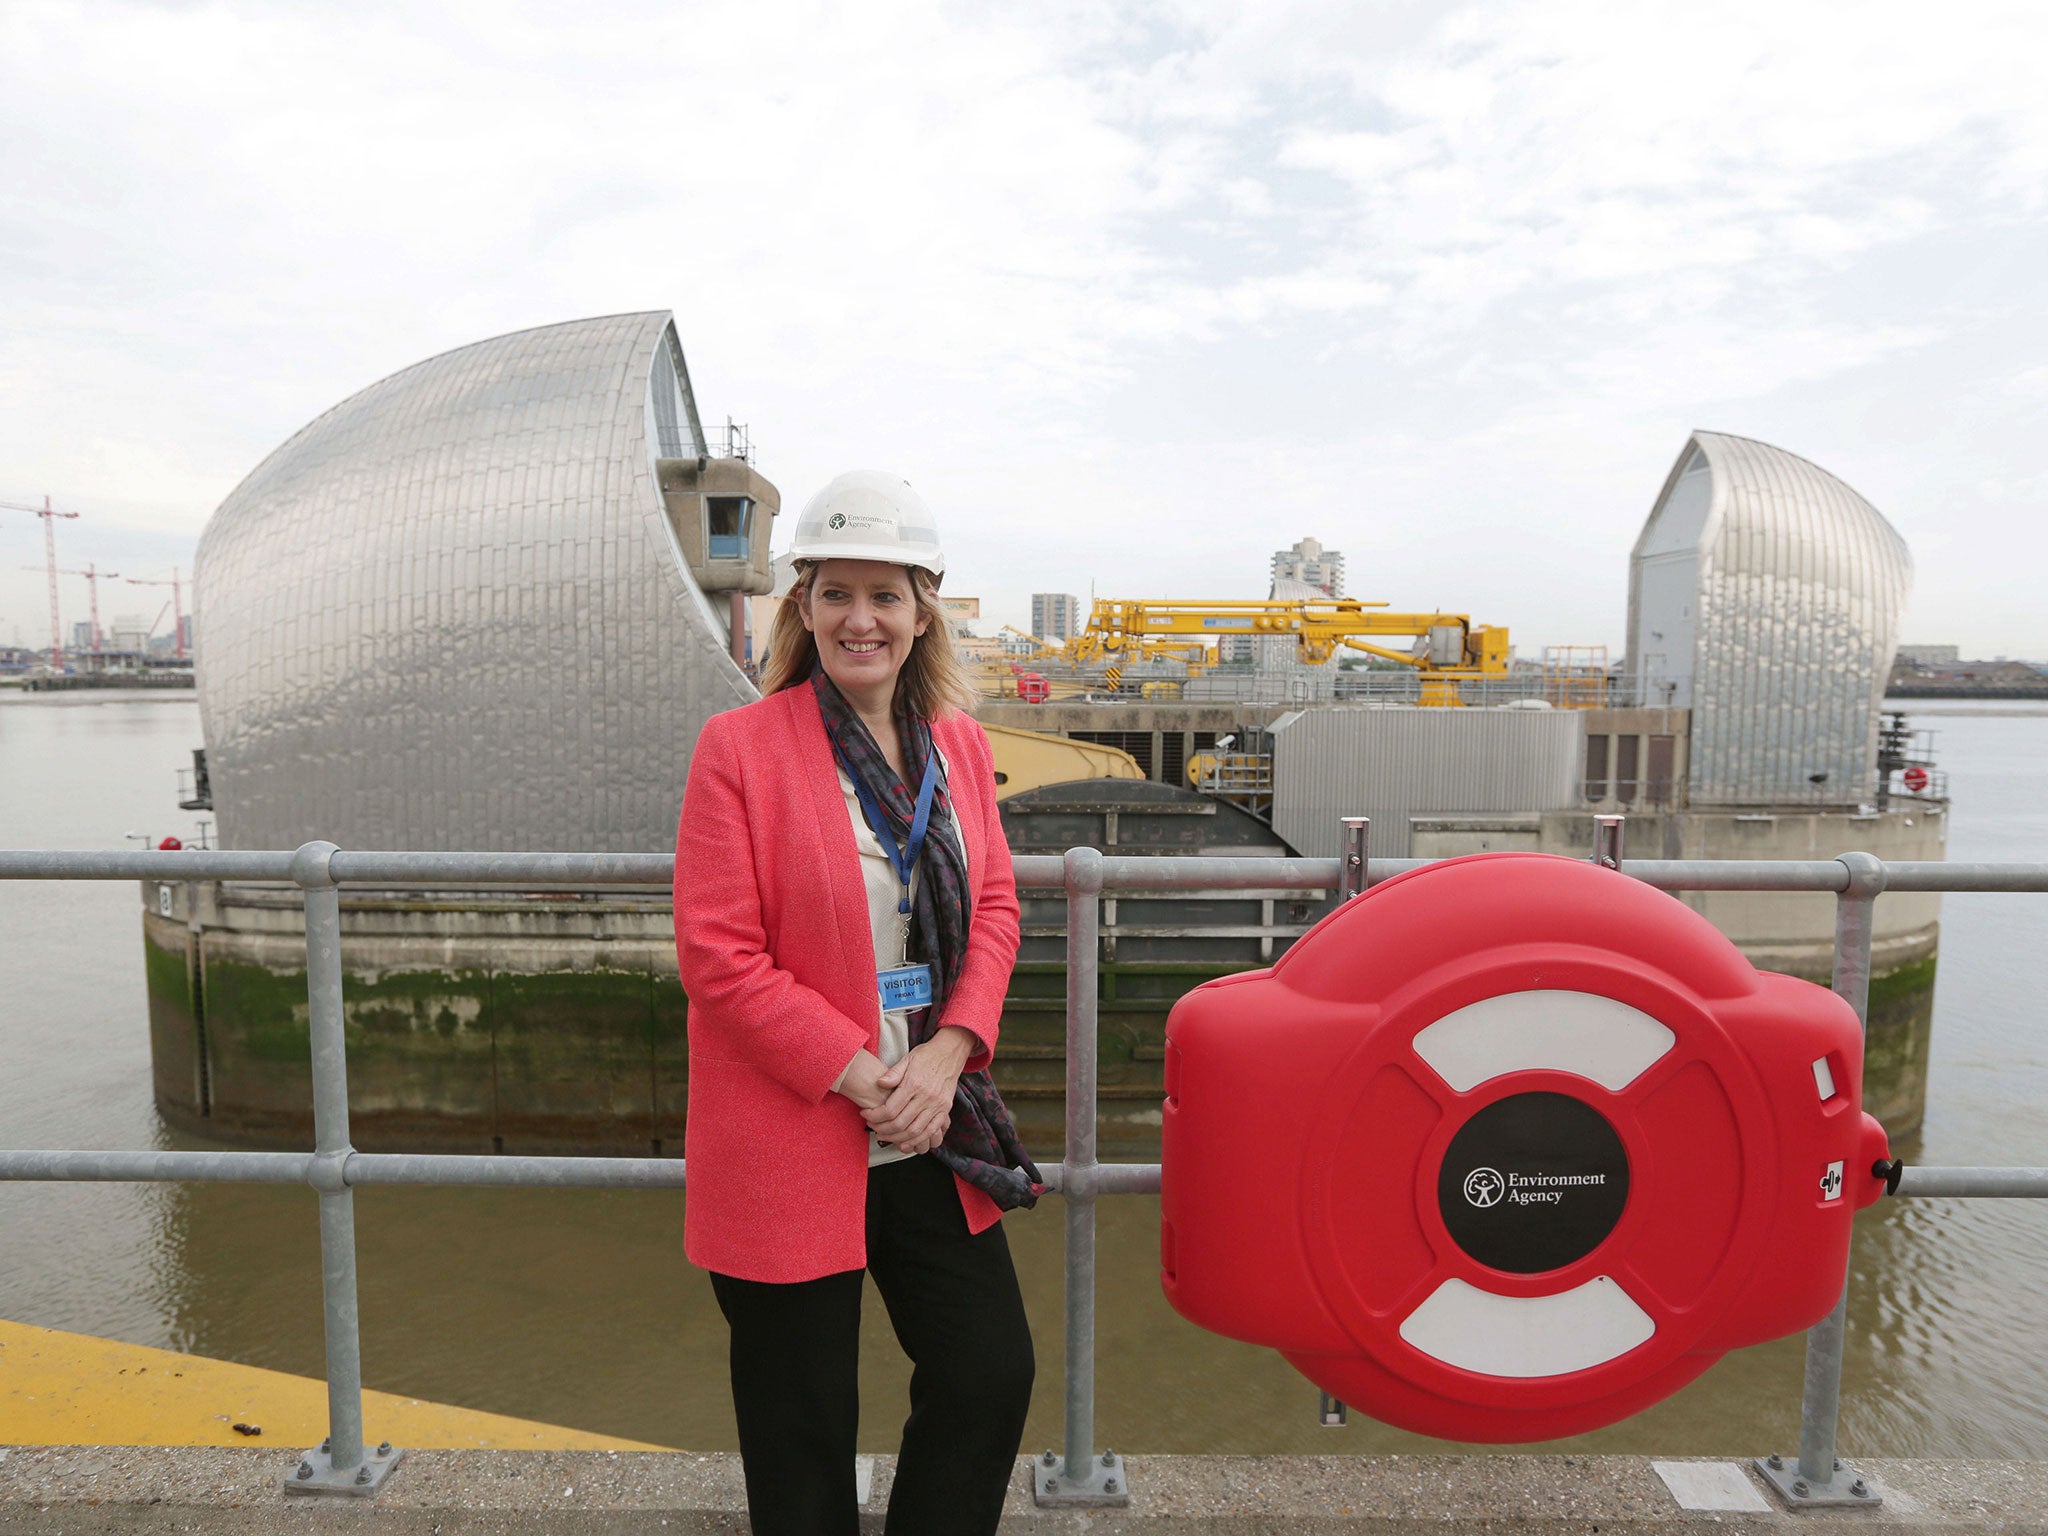 Amber Rudd, the Energy Secretary, says the Thames Barrier design should inspire other infrastructure projects